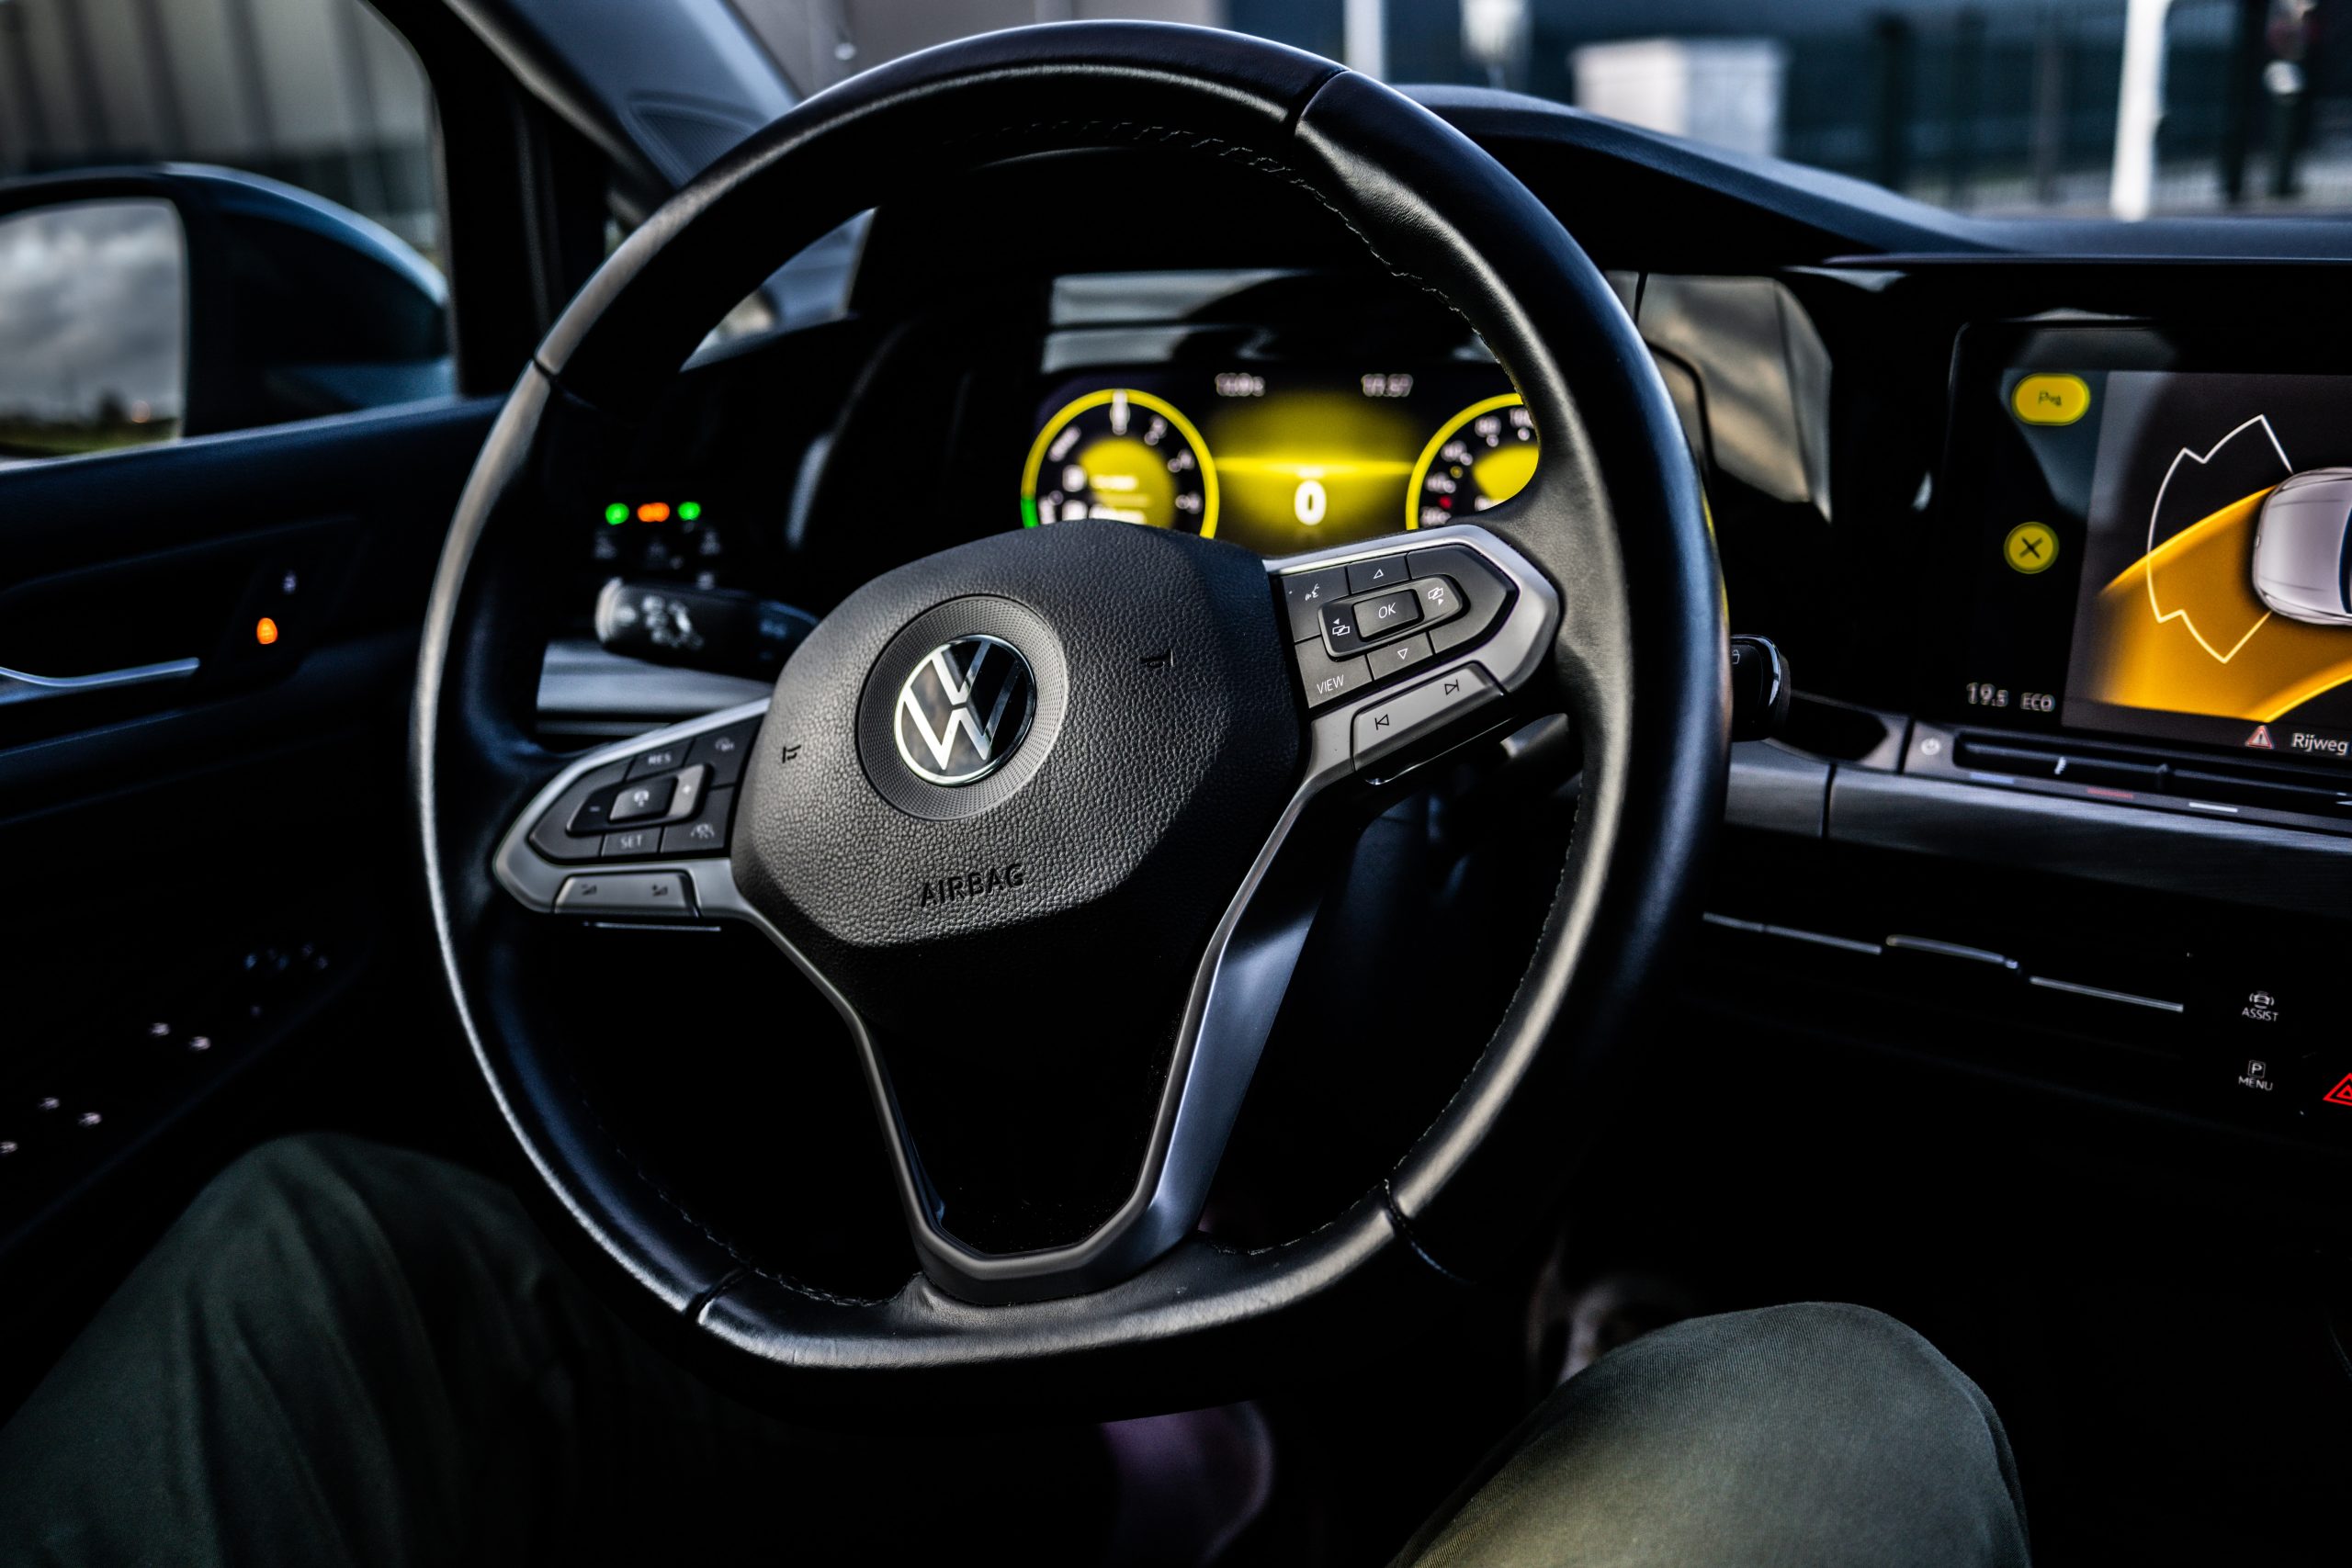 The interior view of a Volkswagen car, featuring the steering wheel and information display.